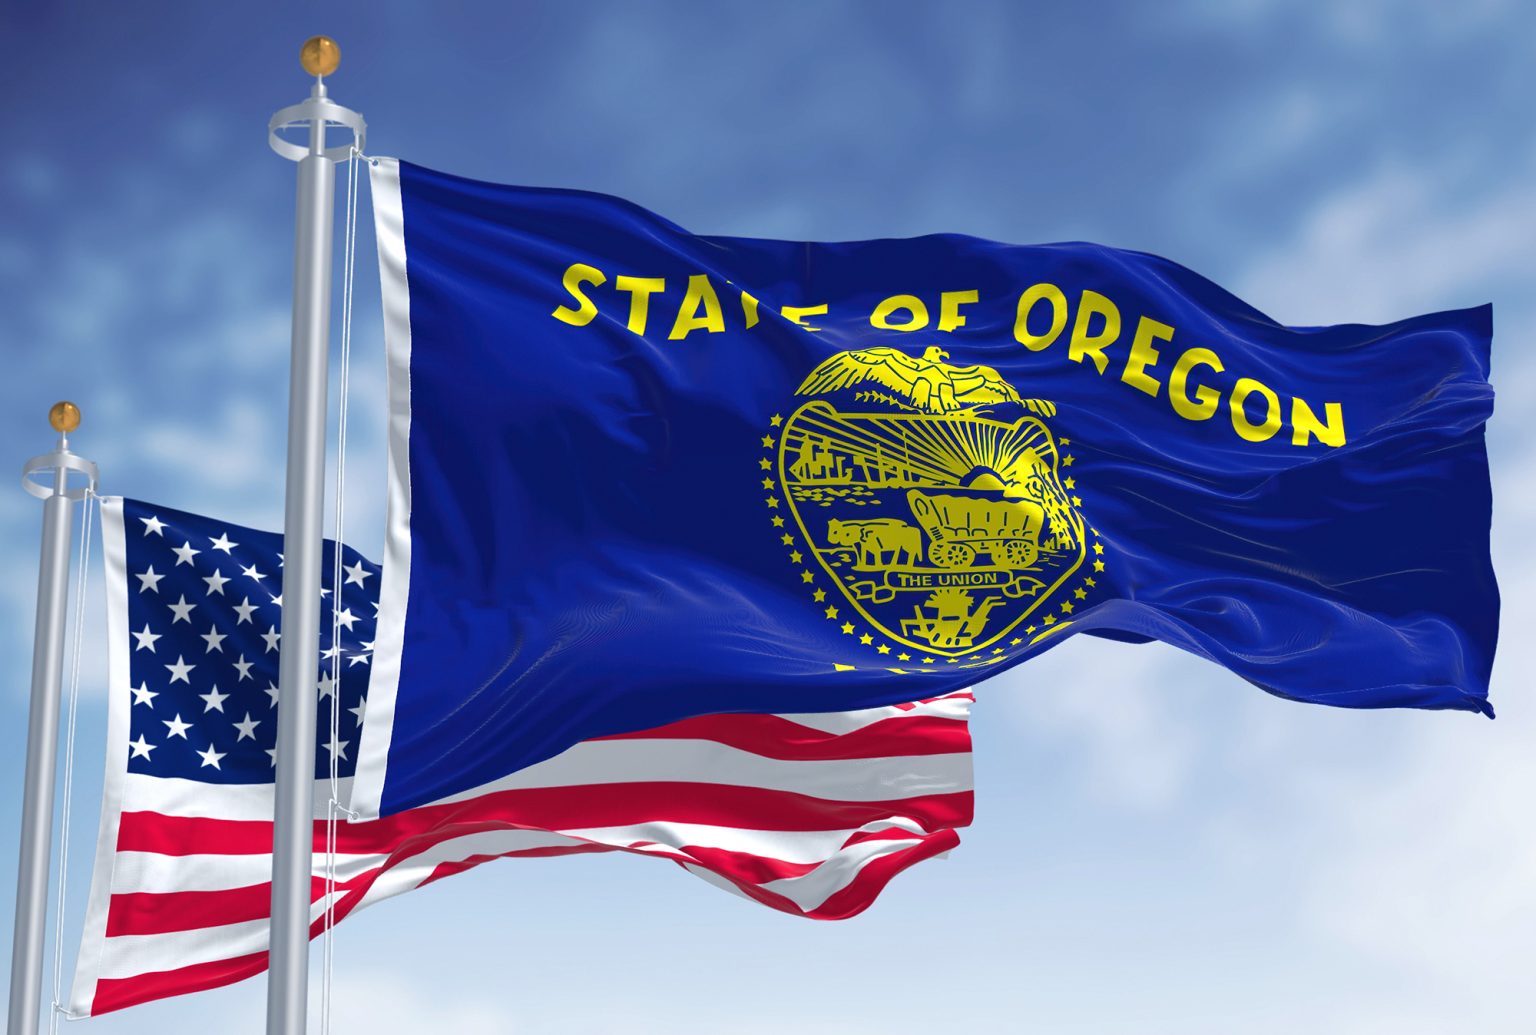 The Oregon state flag waving along with the national flag of the United States of America